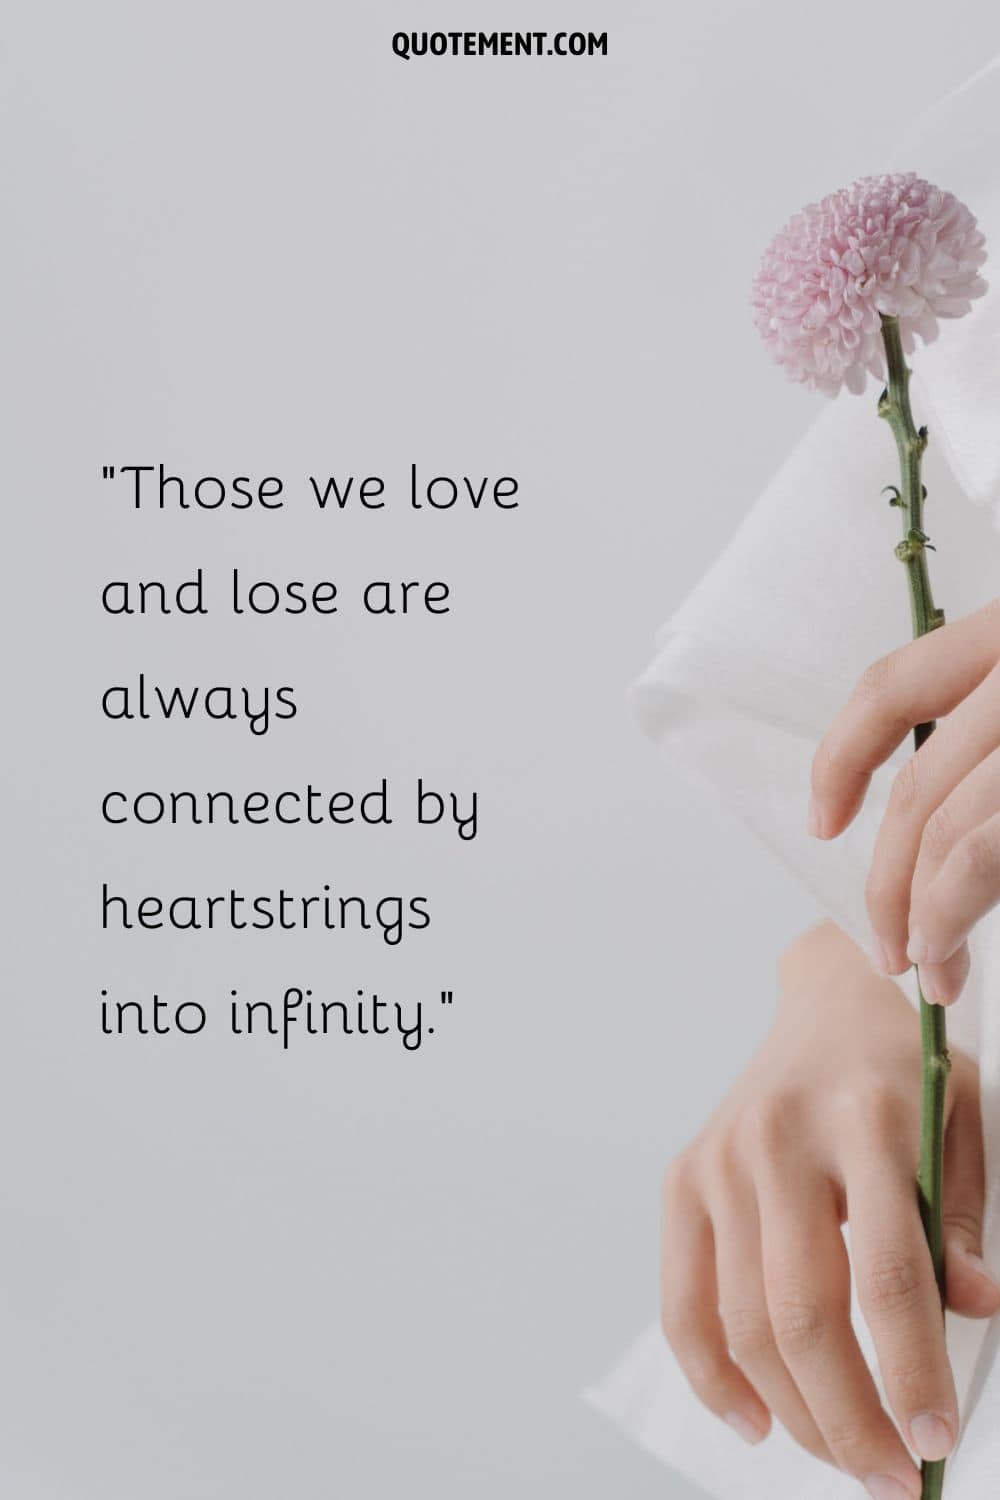 Those we love and lose are always connected by heartstrings into infinity.